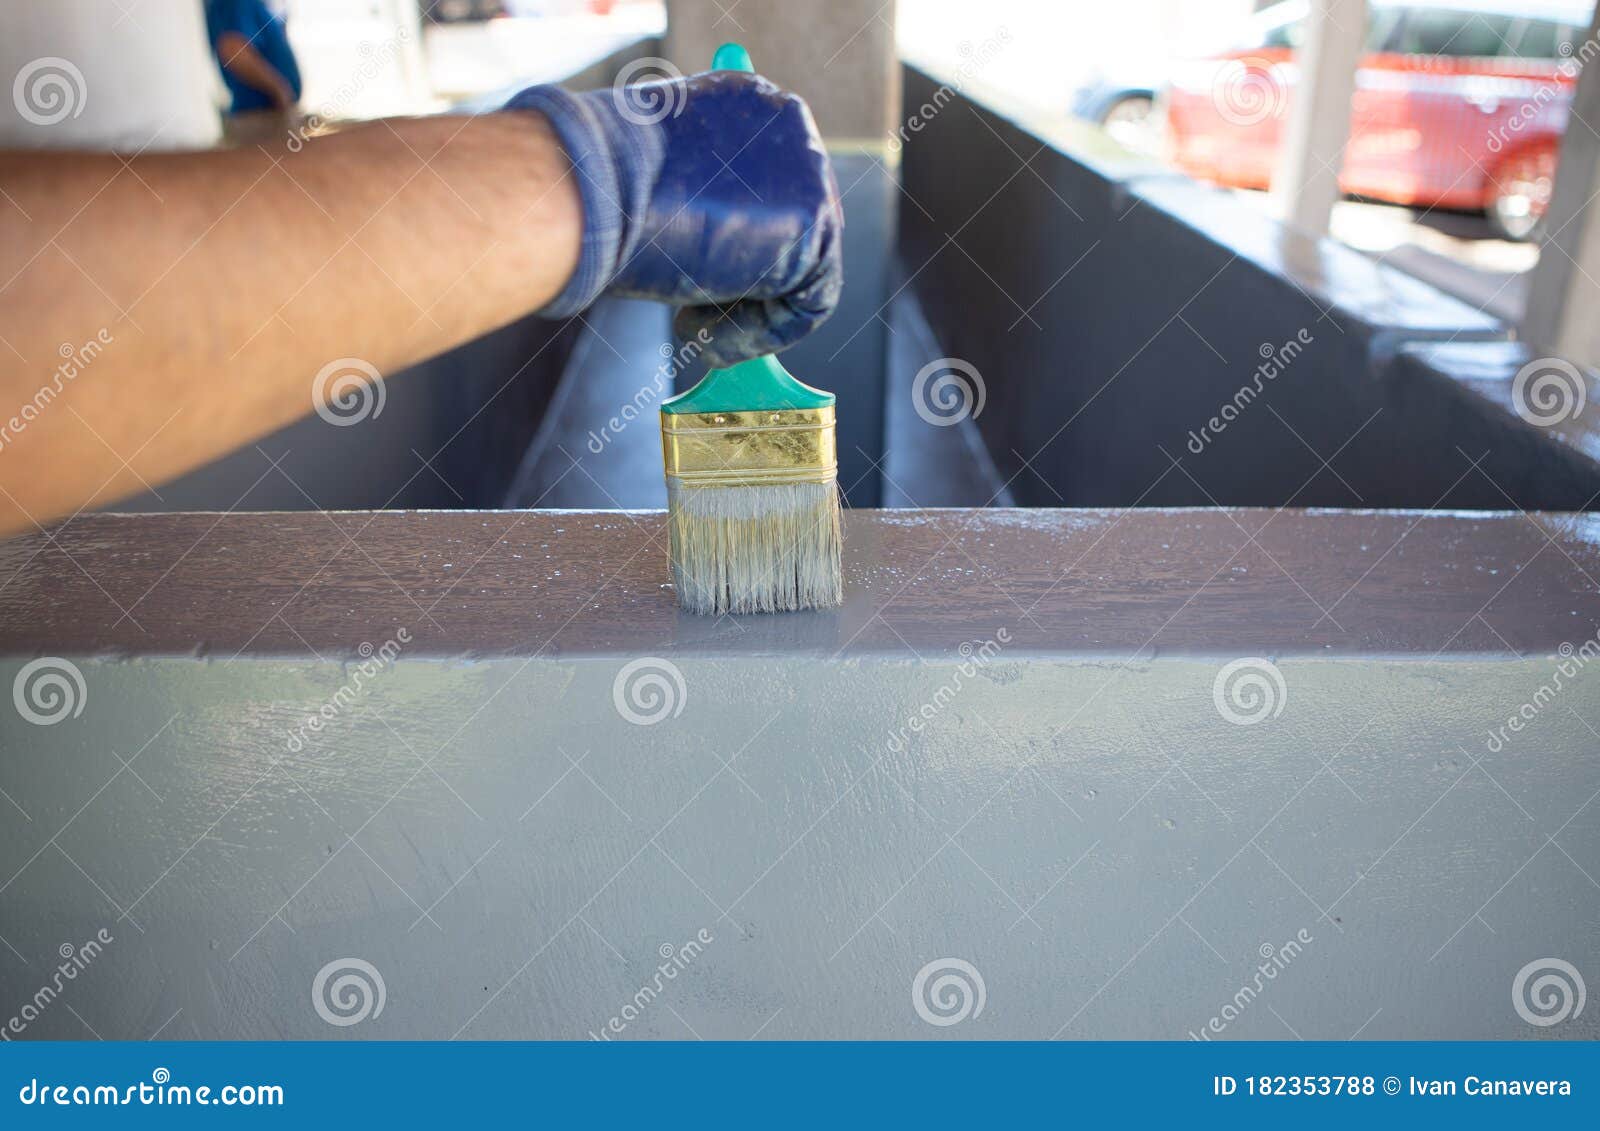 man using a brush to paint a swimming pool